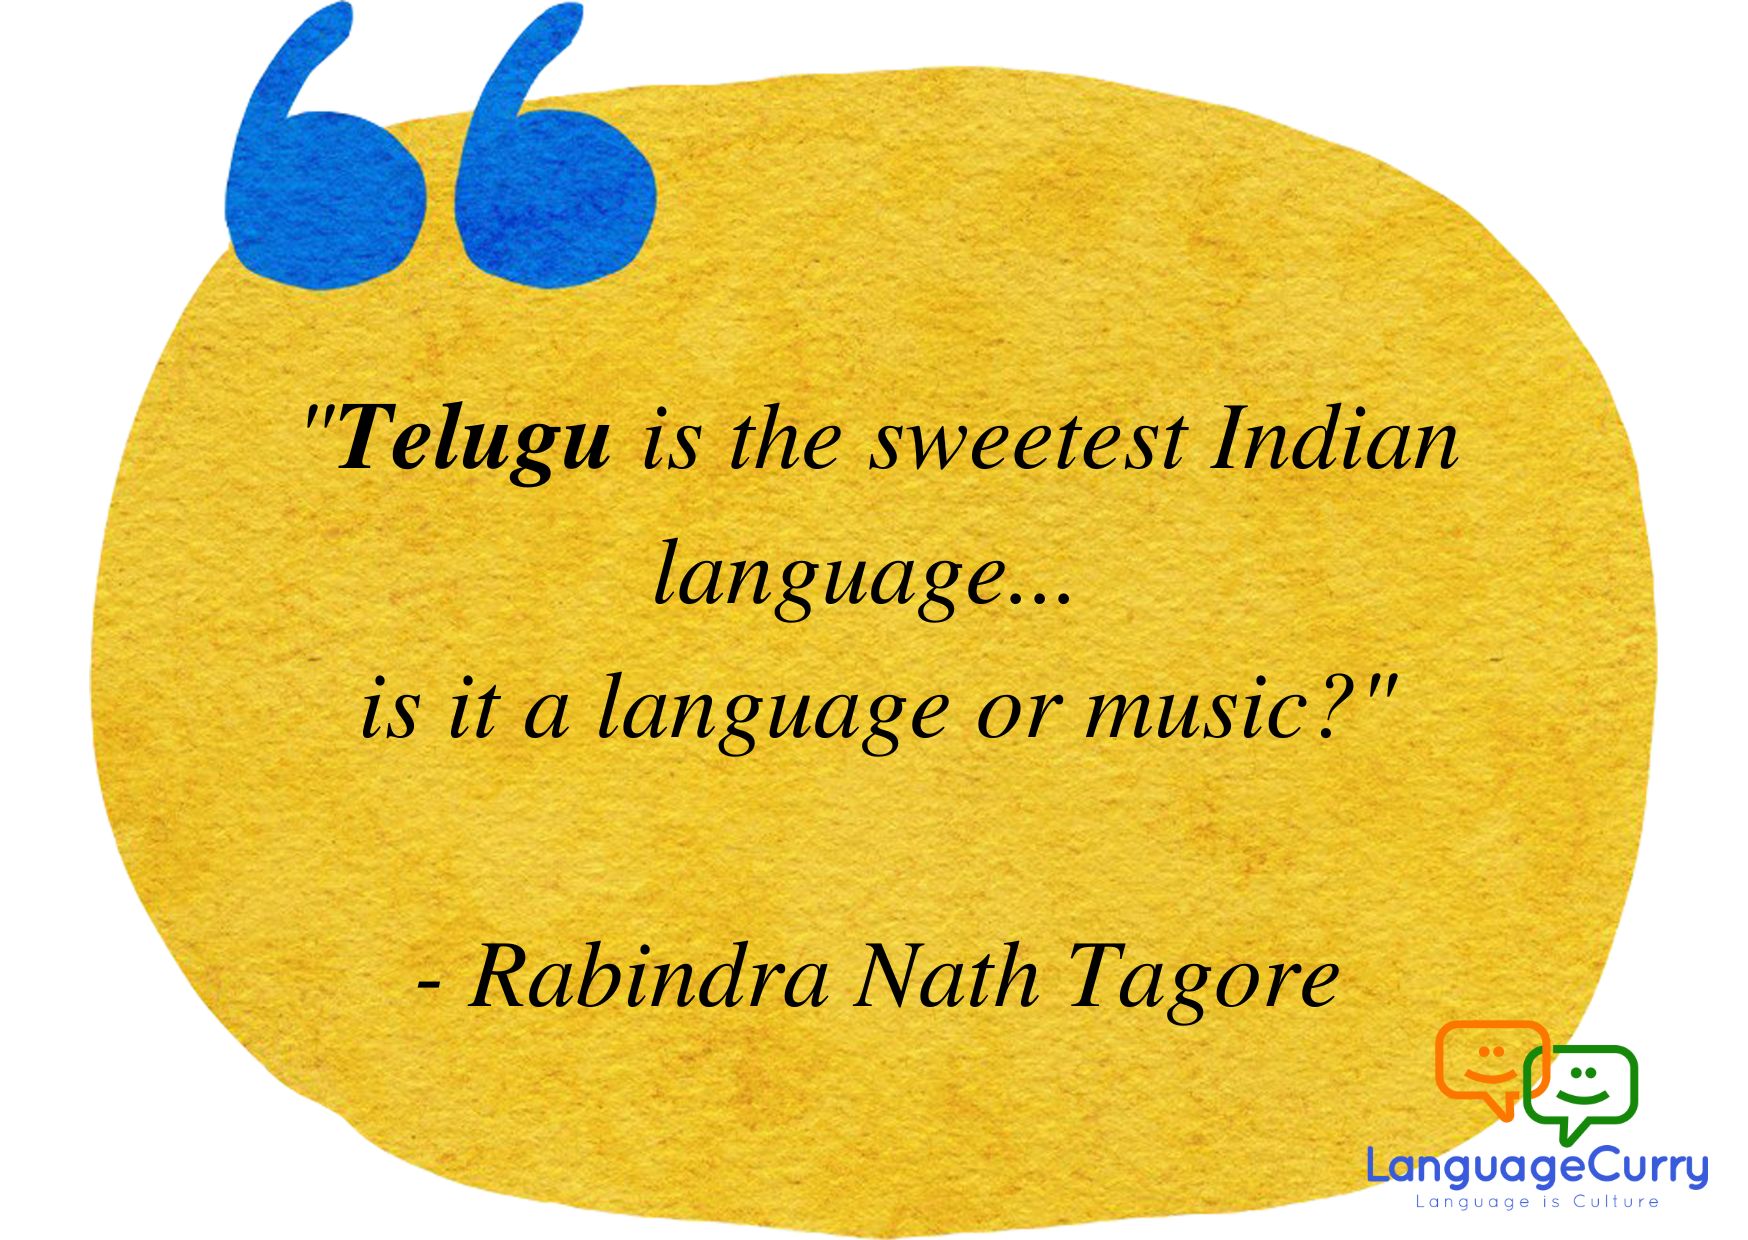 Telugu is sweetest language - a quote by Rabindra Nath Tagore